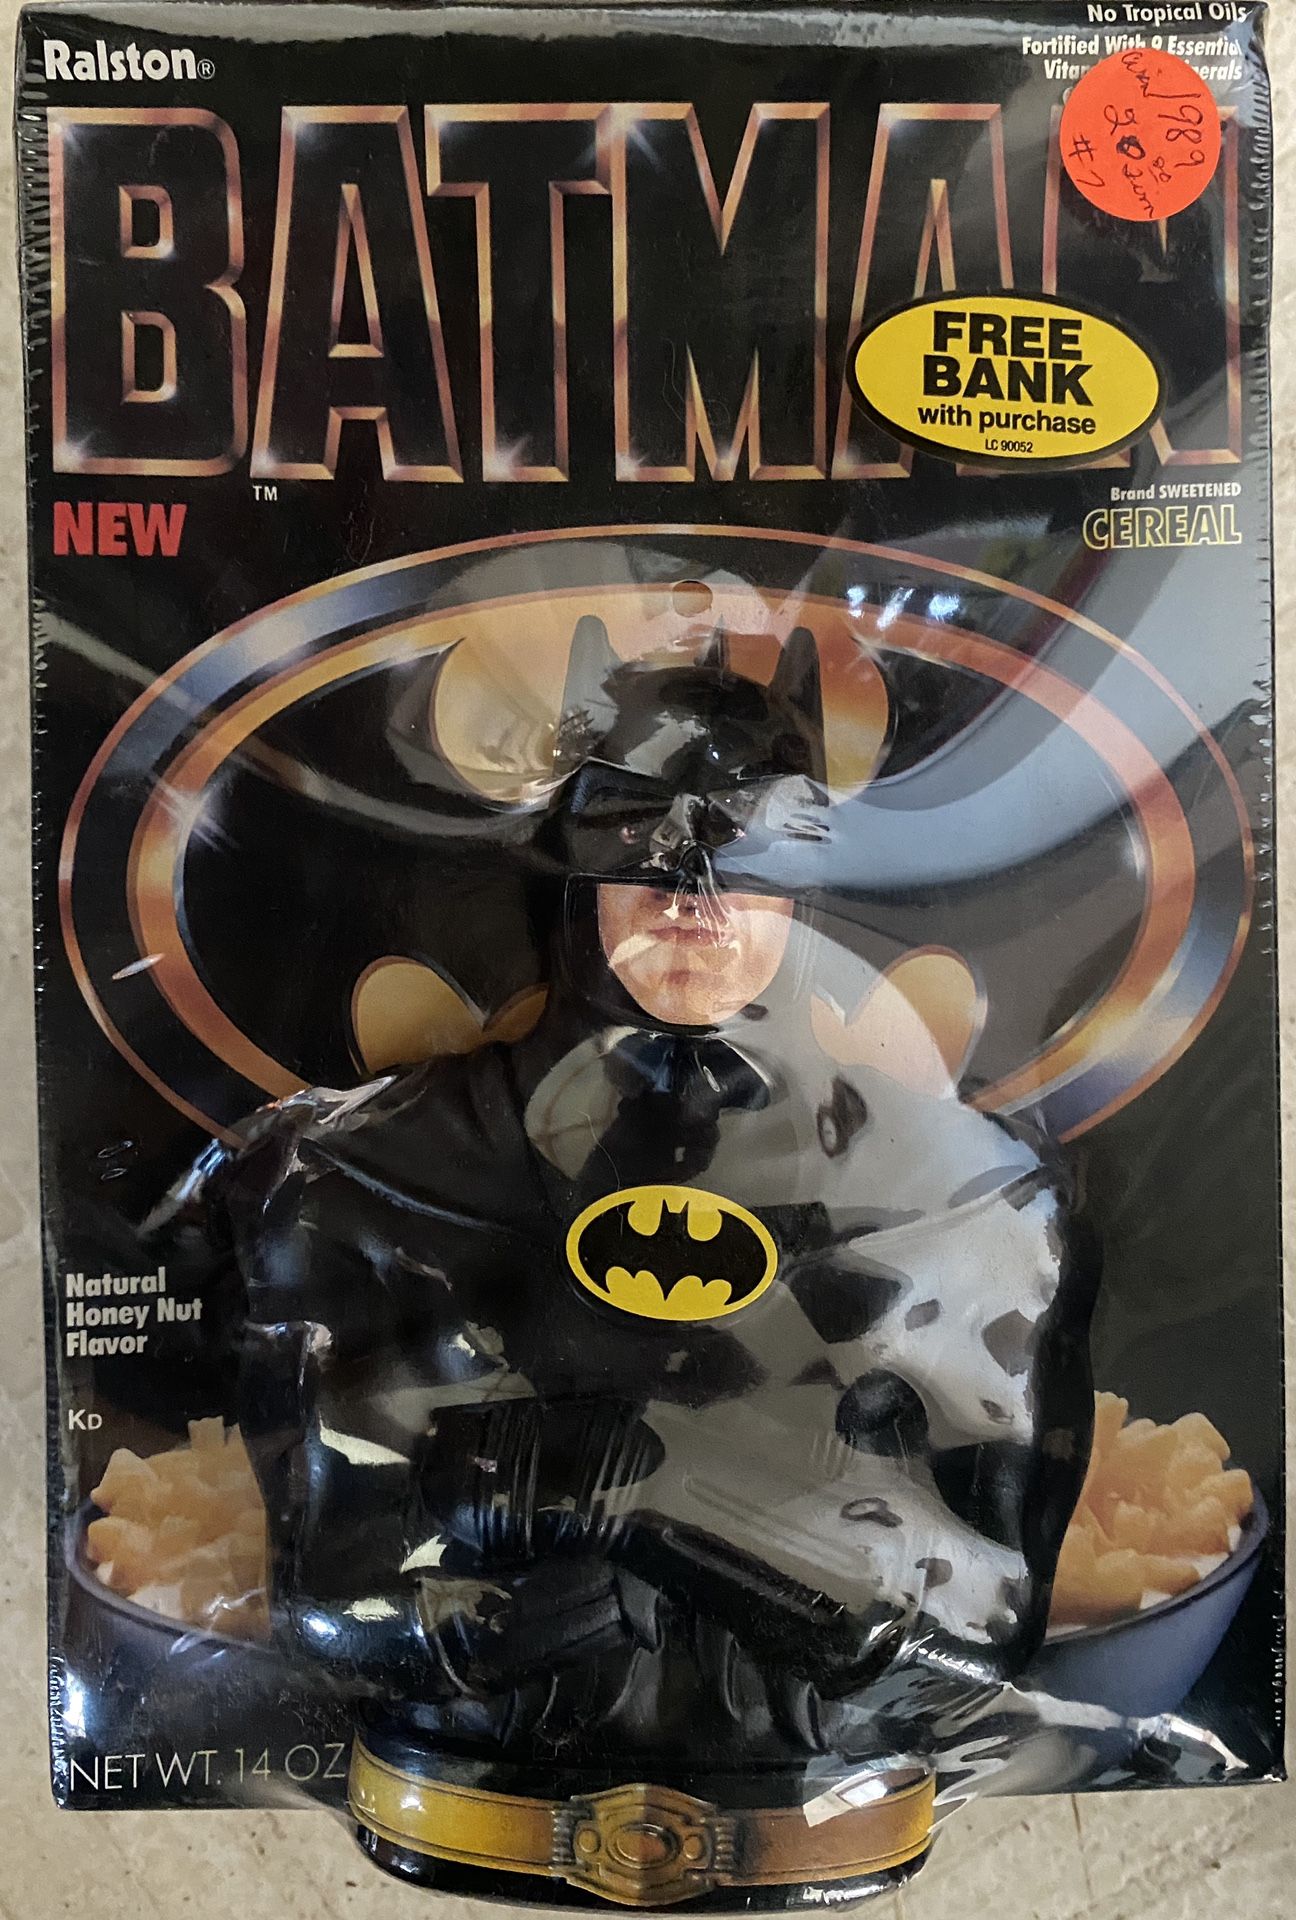 Vintage 1989 Ralston BATMAN Cereal Box Collectible Coin Bank Toy (SEALED)